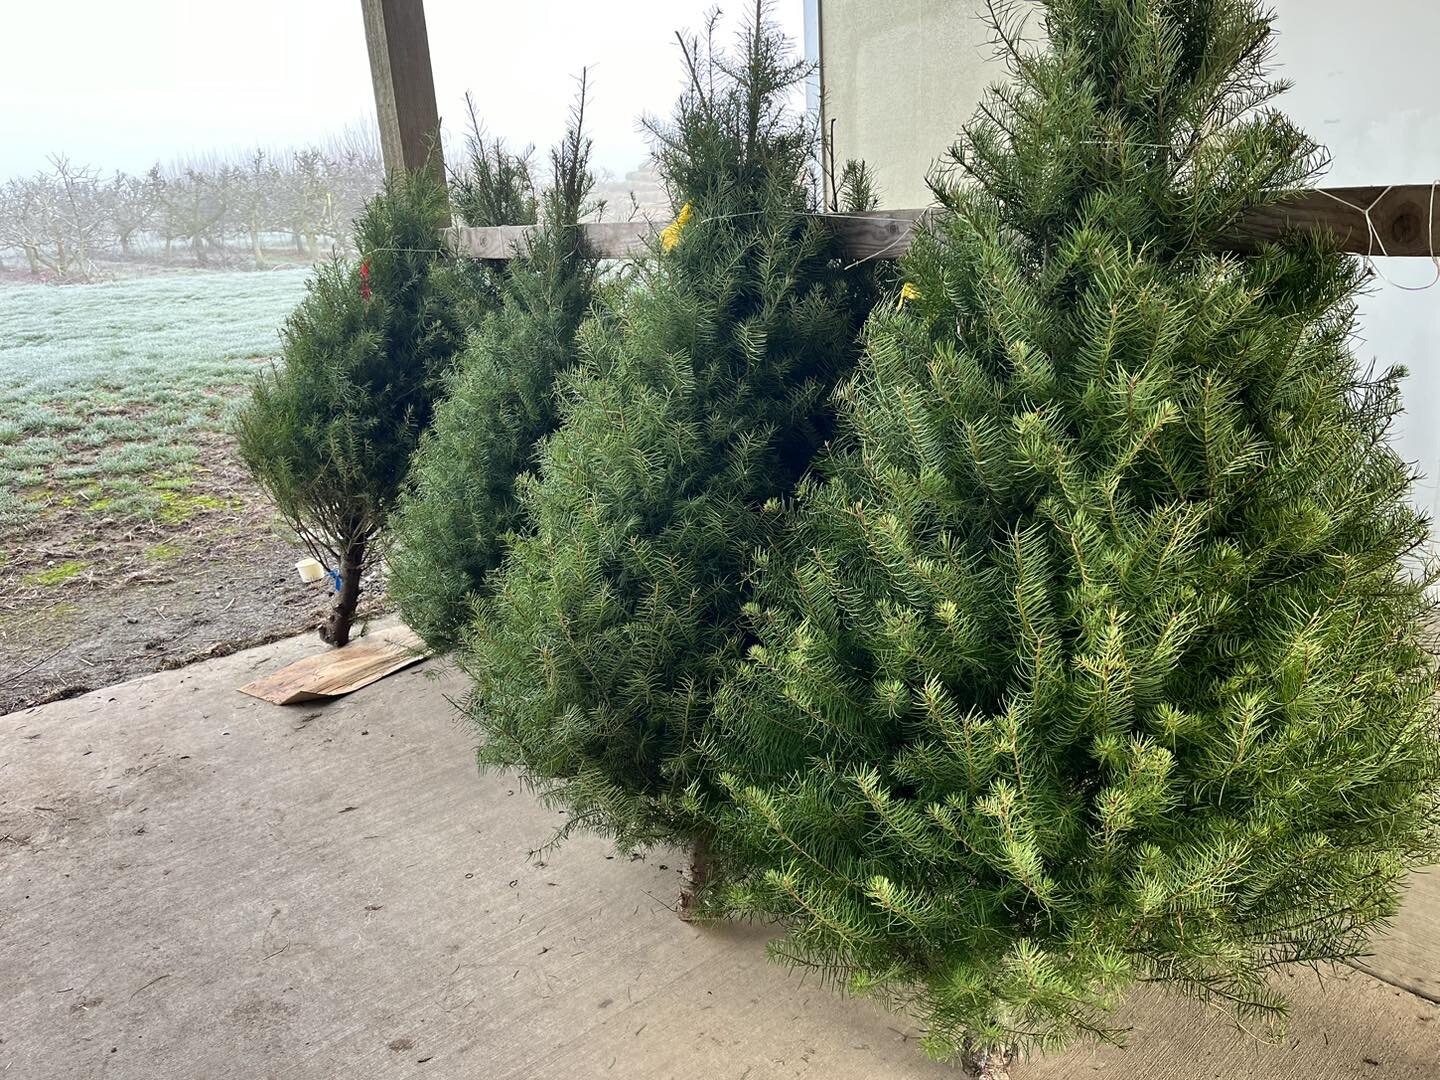 We still have some Christmas trees! Come get them while they&rsquo;re in stock! We also have winter squash, cranberries, dried apples, jams and jellies (available in gift packs or individual jars), and more produce and fun shelf stable stocking stuff